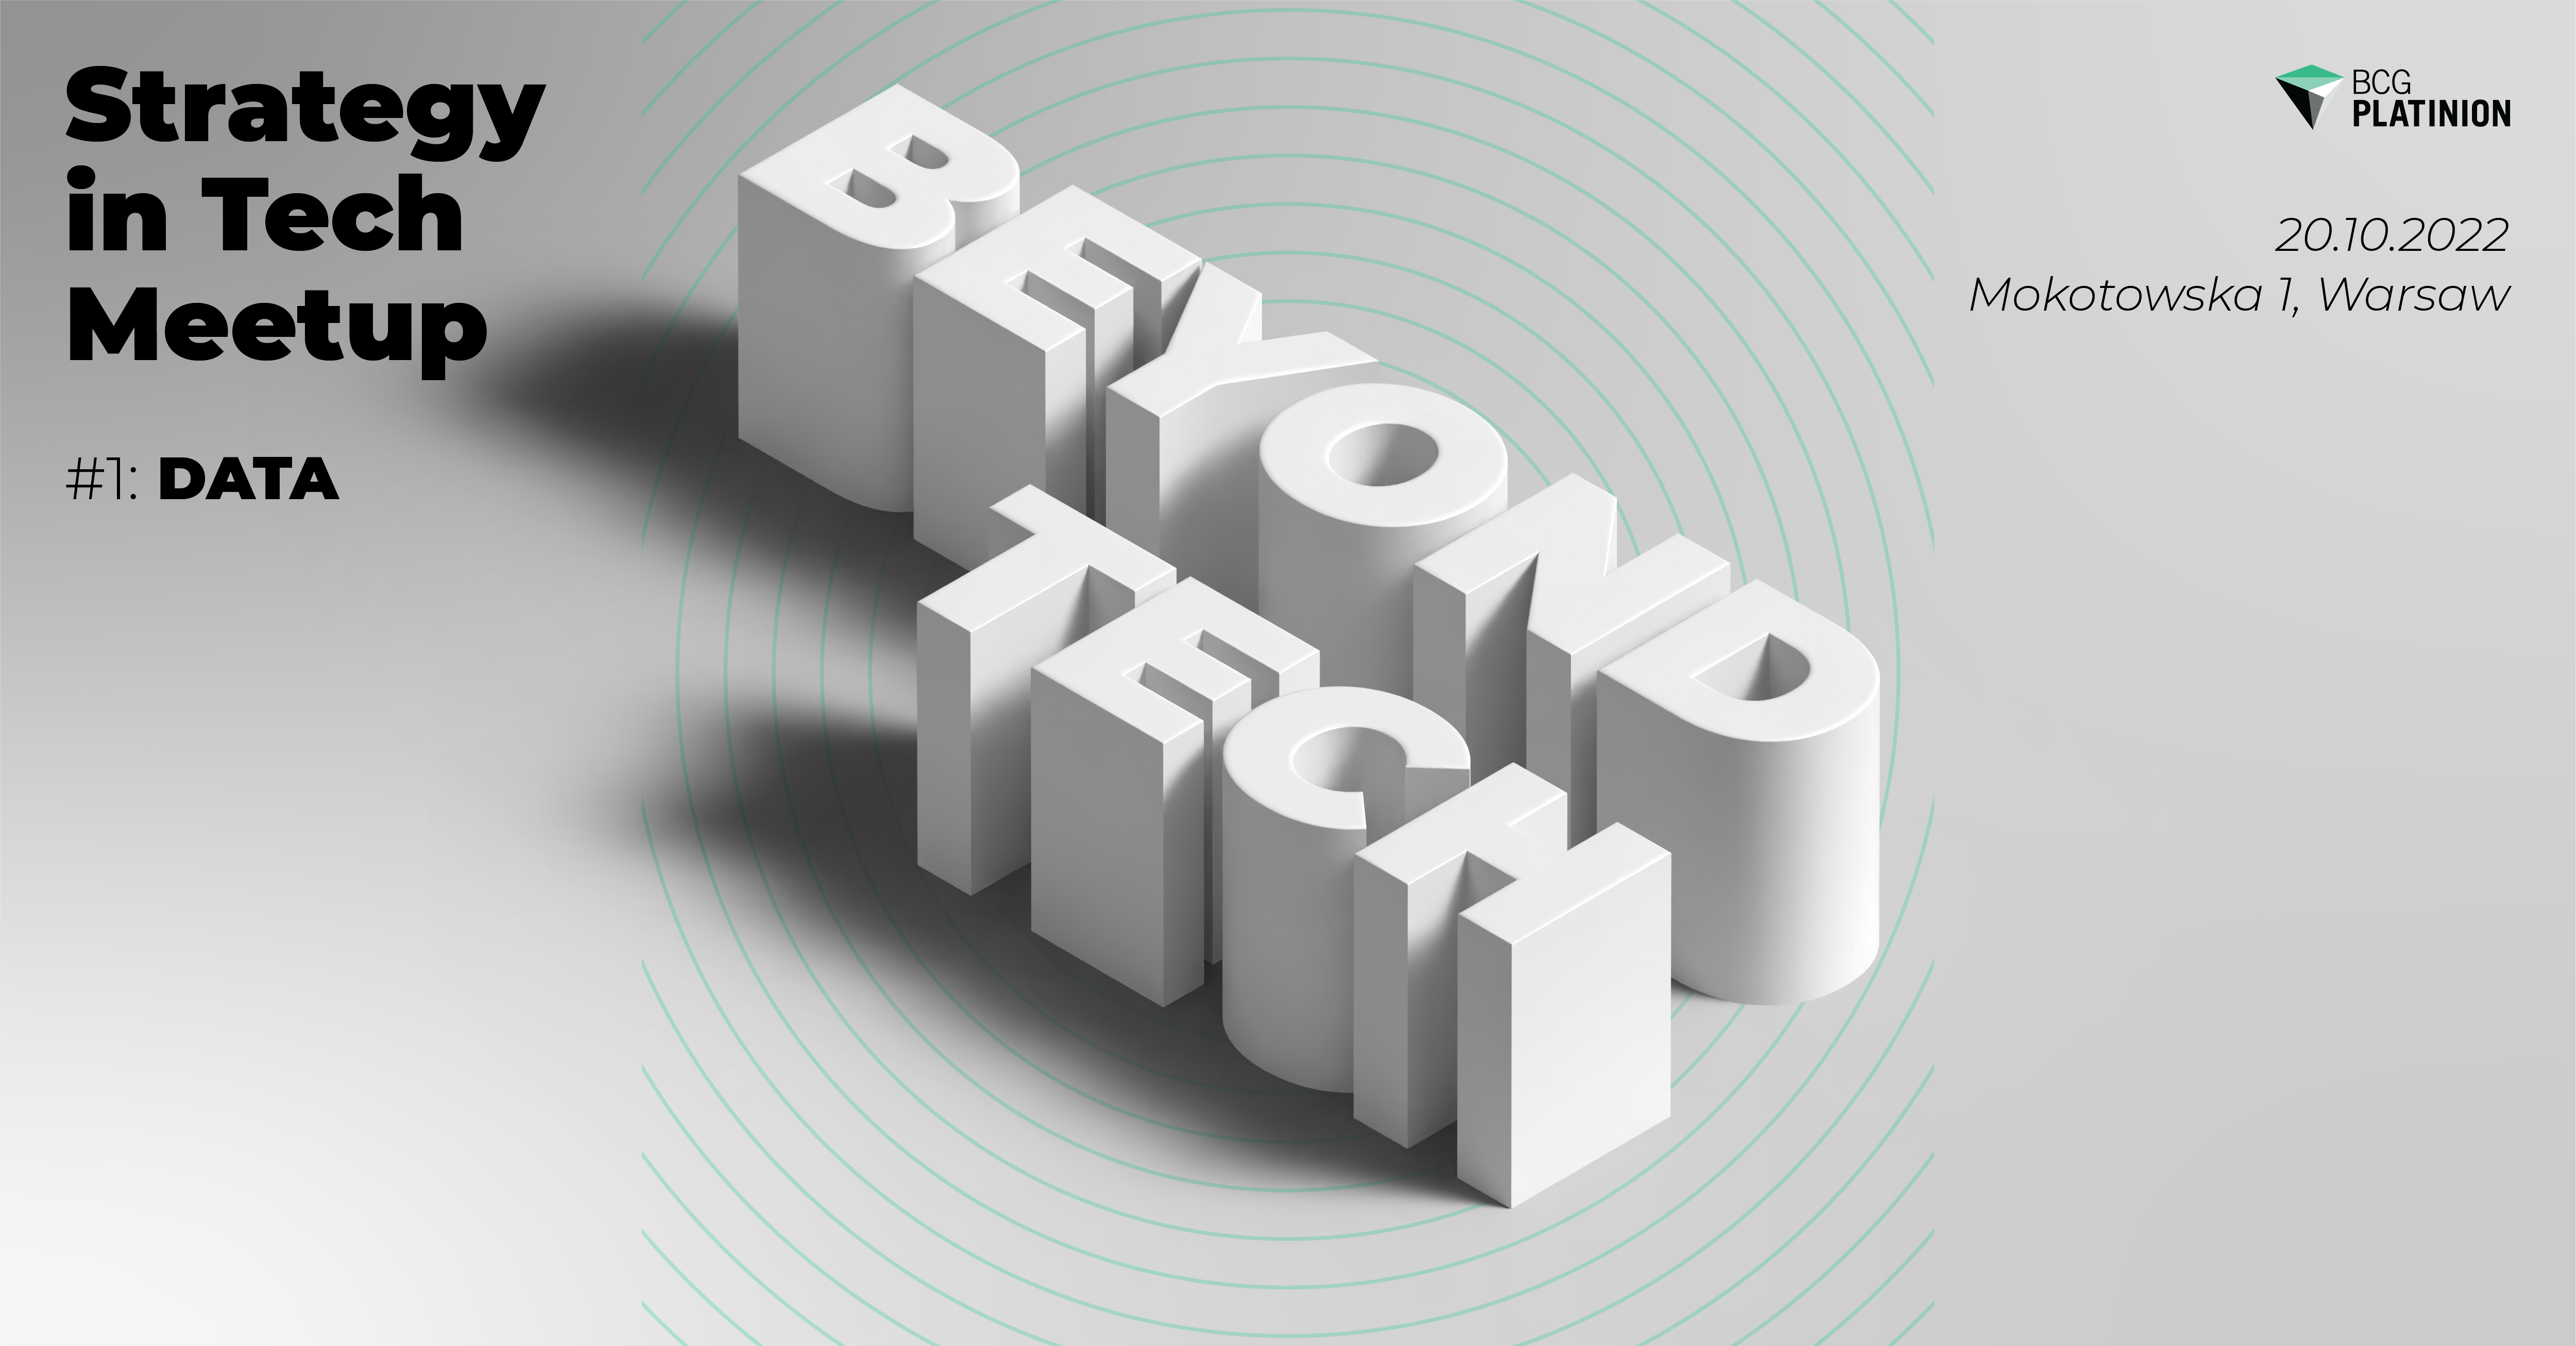 beyond-tech-strategy-in-tech-meetup-by-bcg-platinion